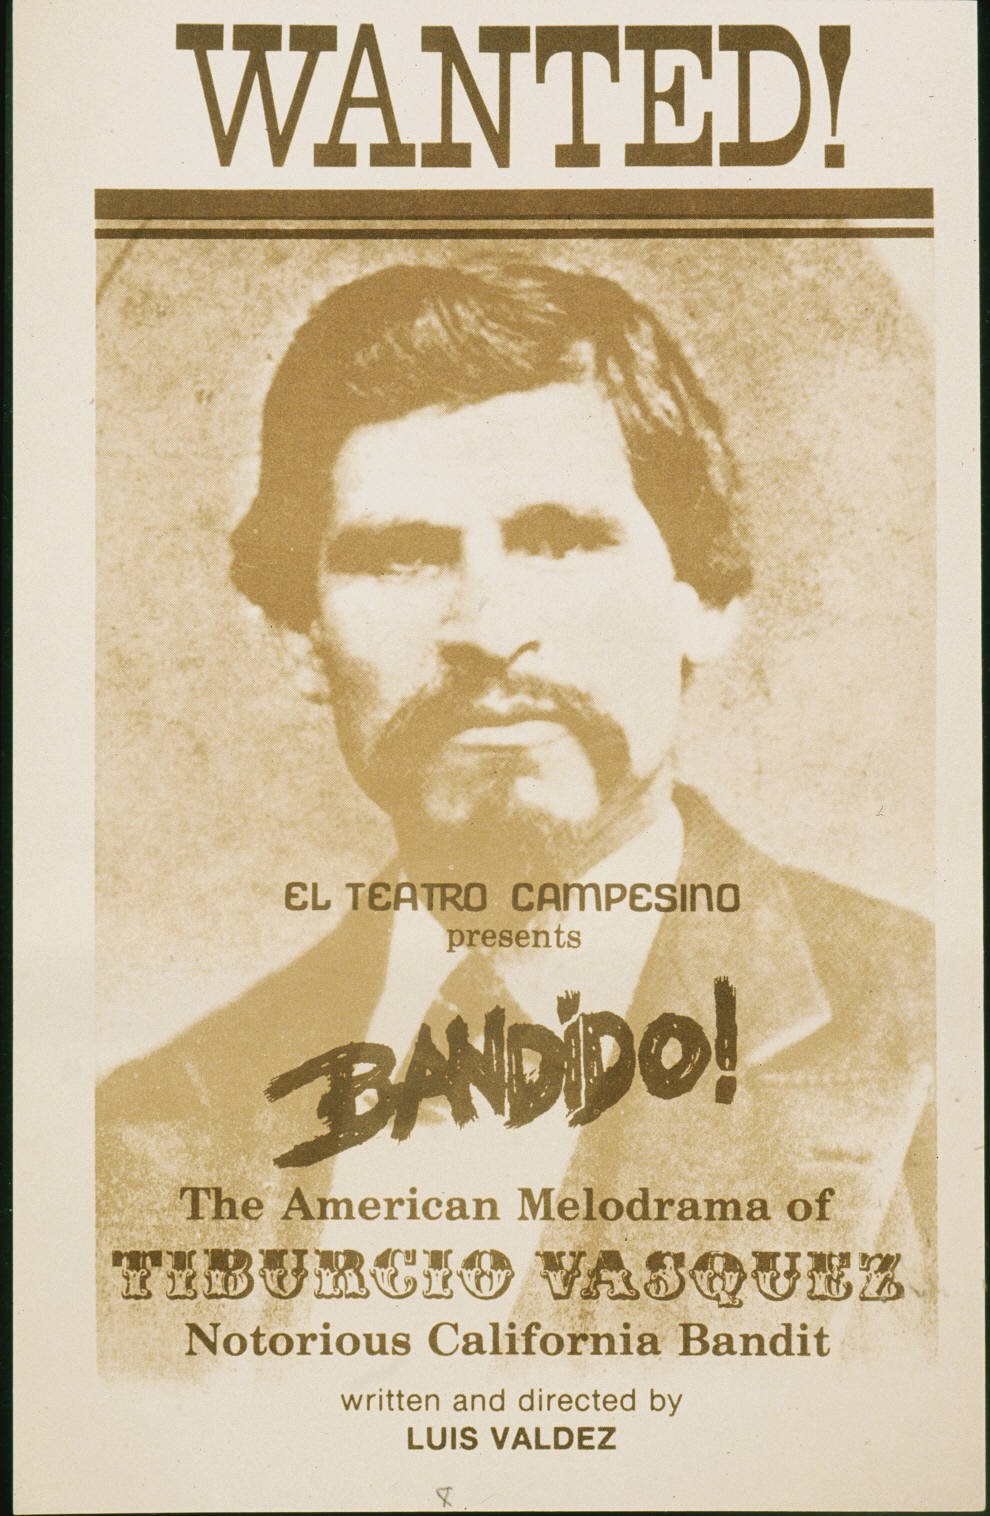 A theatrical poster for the 20th century melodrama “Bandido!”